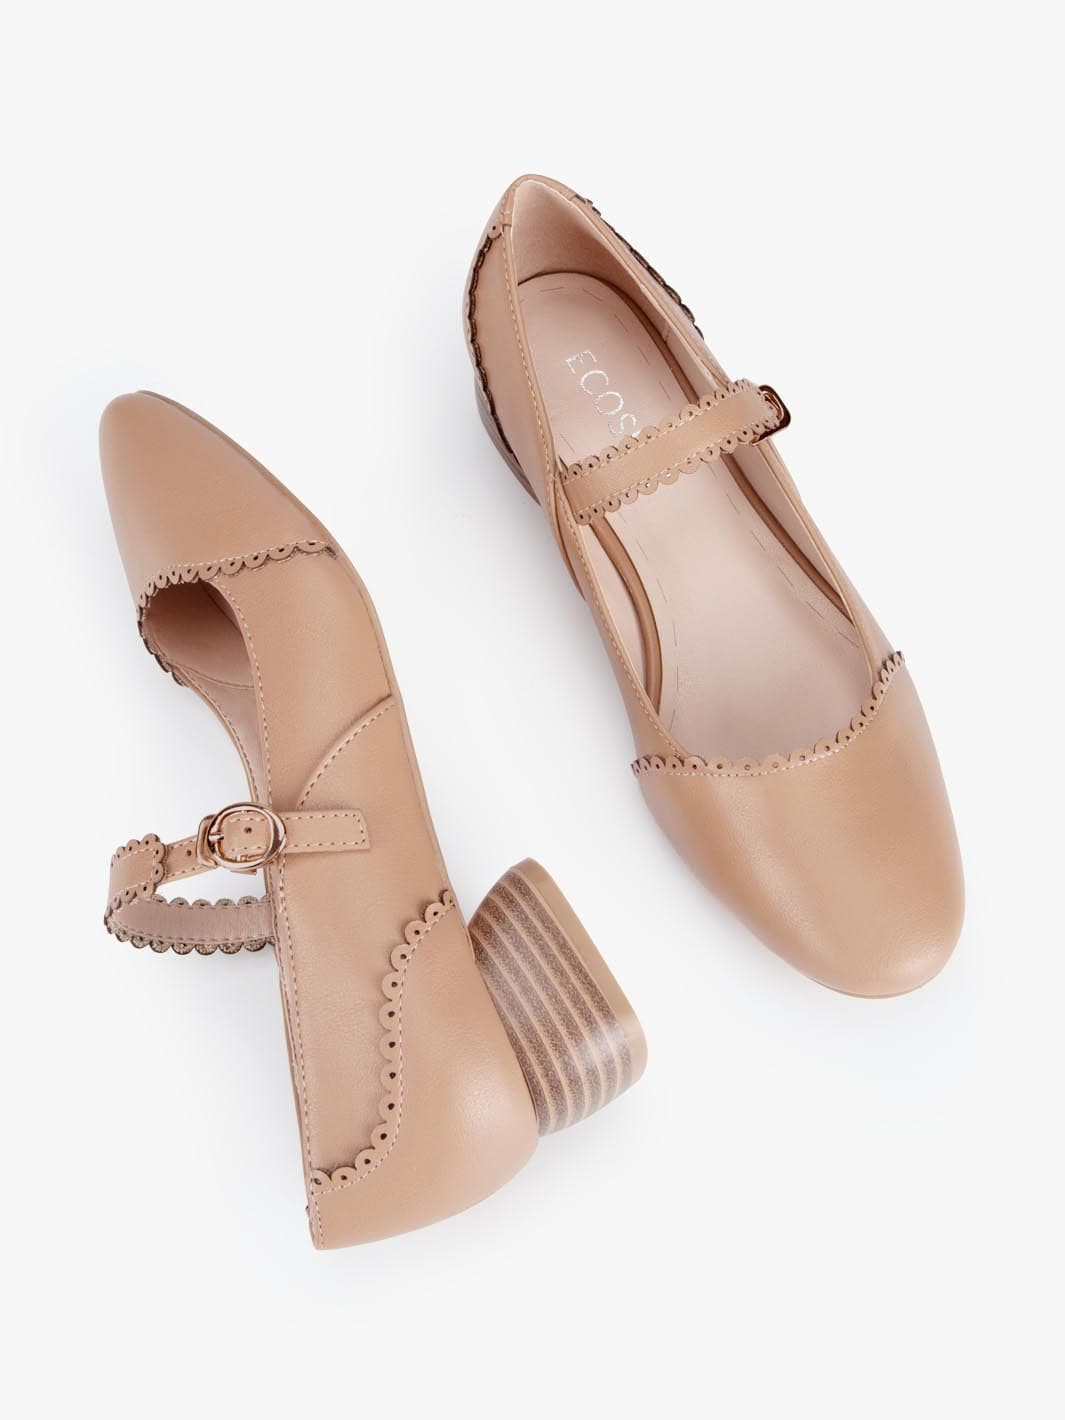 Beautiful Flora Classic Shoes - Ethically Made Vegan Leather Shoes– Ecosusi